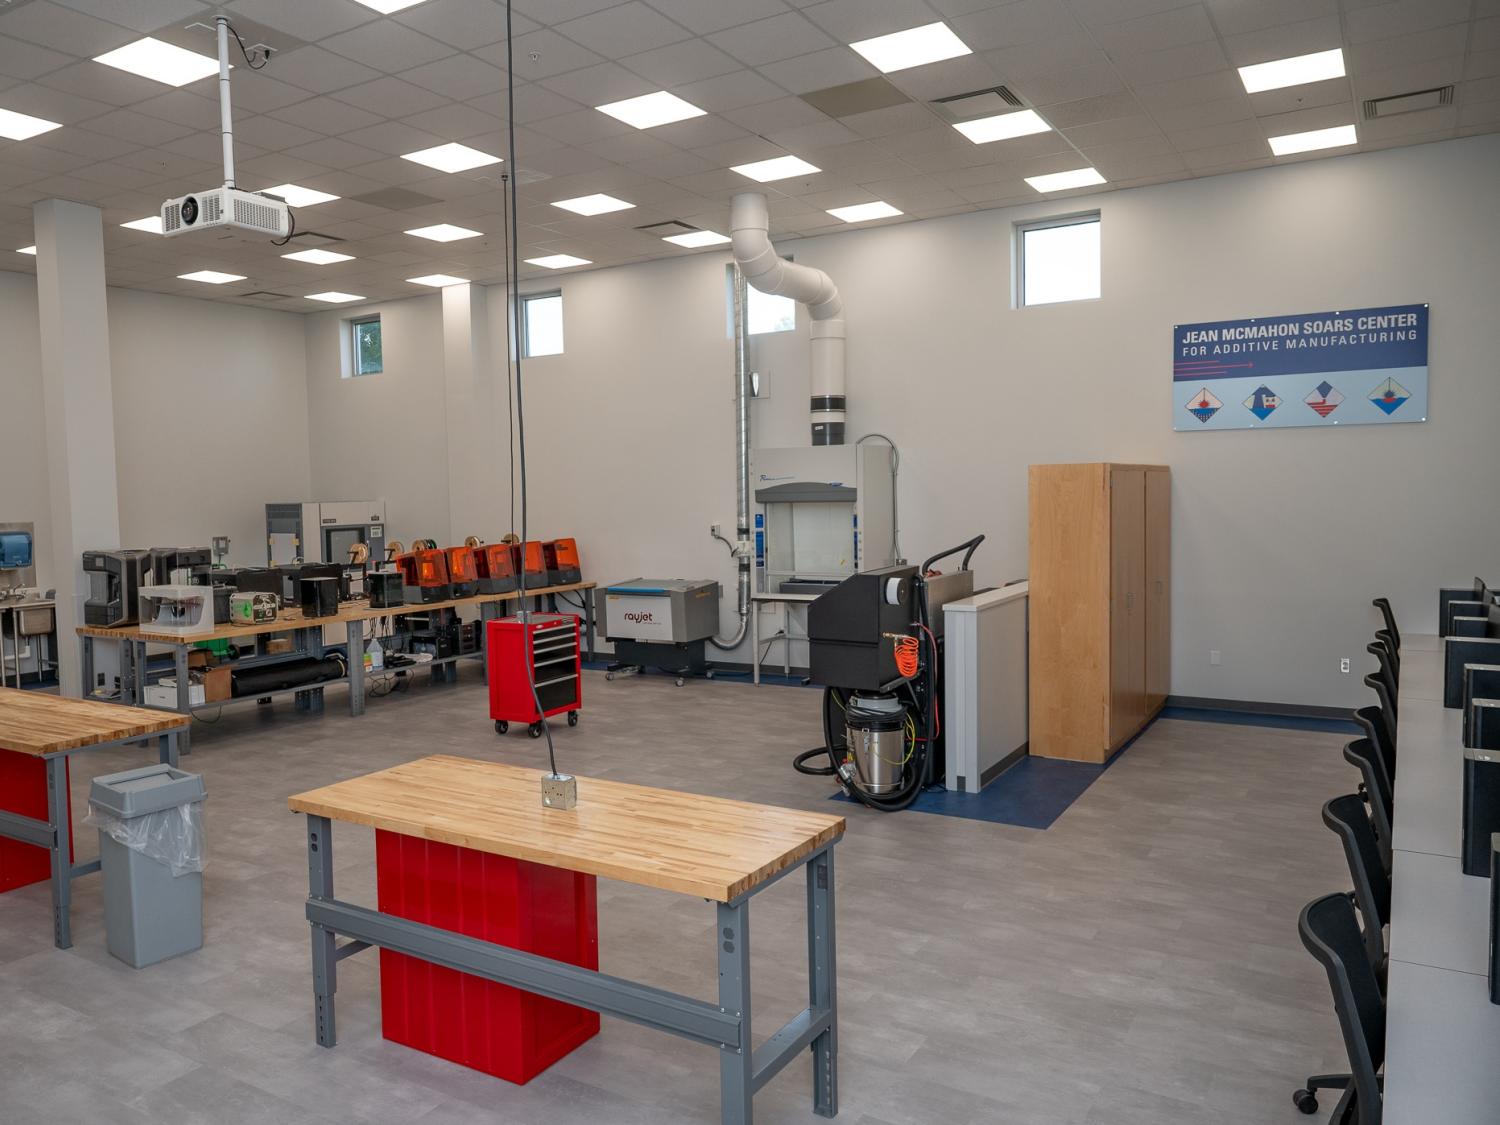 Tables and equipment inside the new Jean McMahon Soars Center for Additive Manufacturing at Penn College